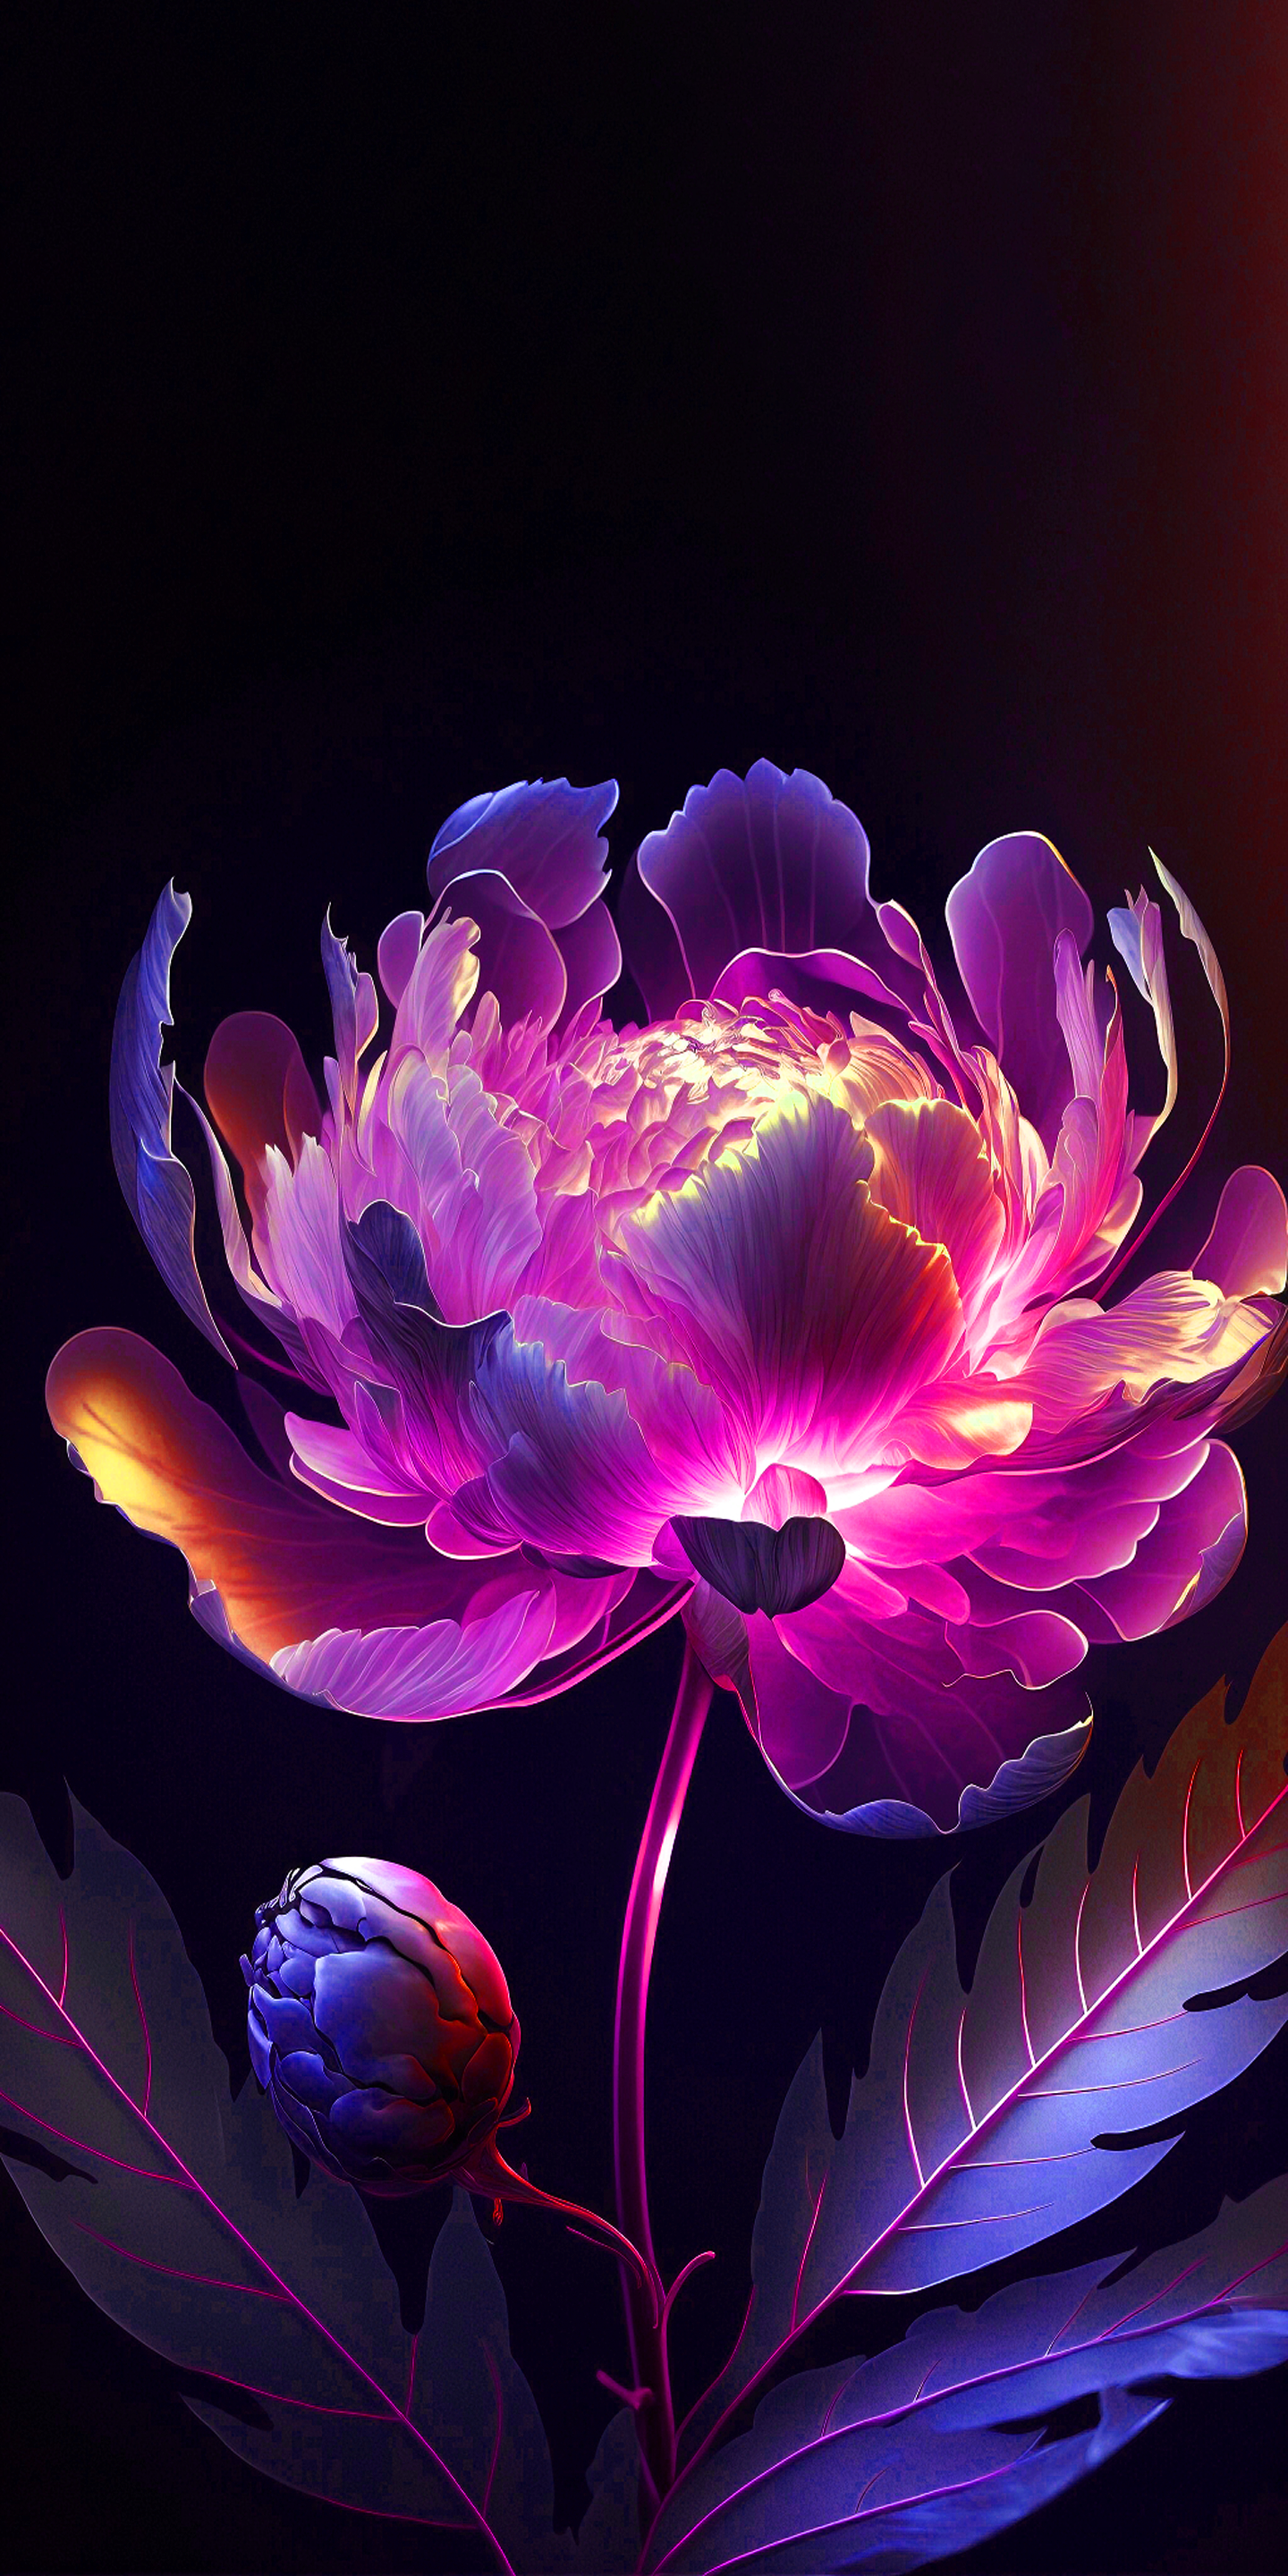 HDR flower wallpapers for iPhone